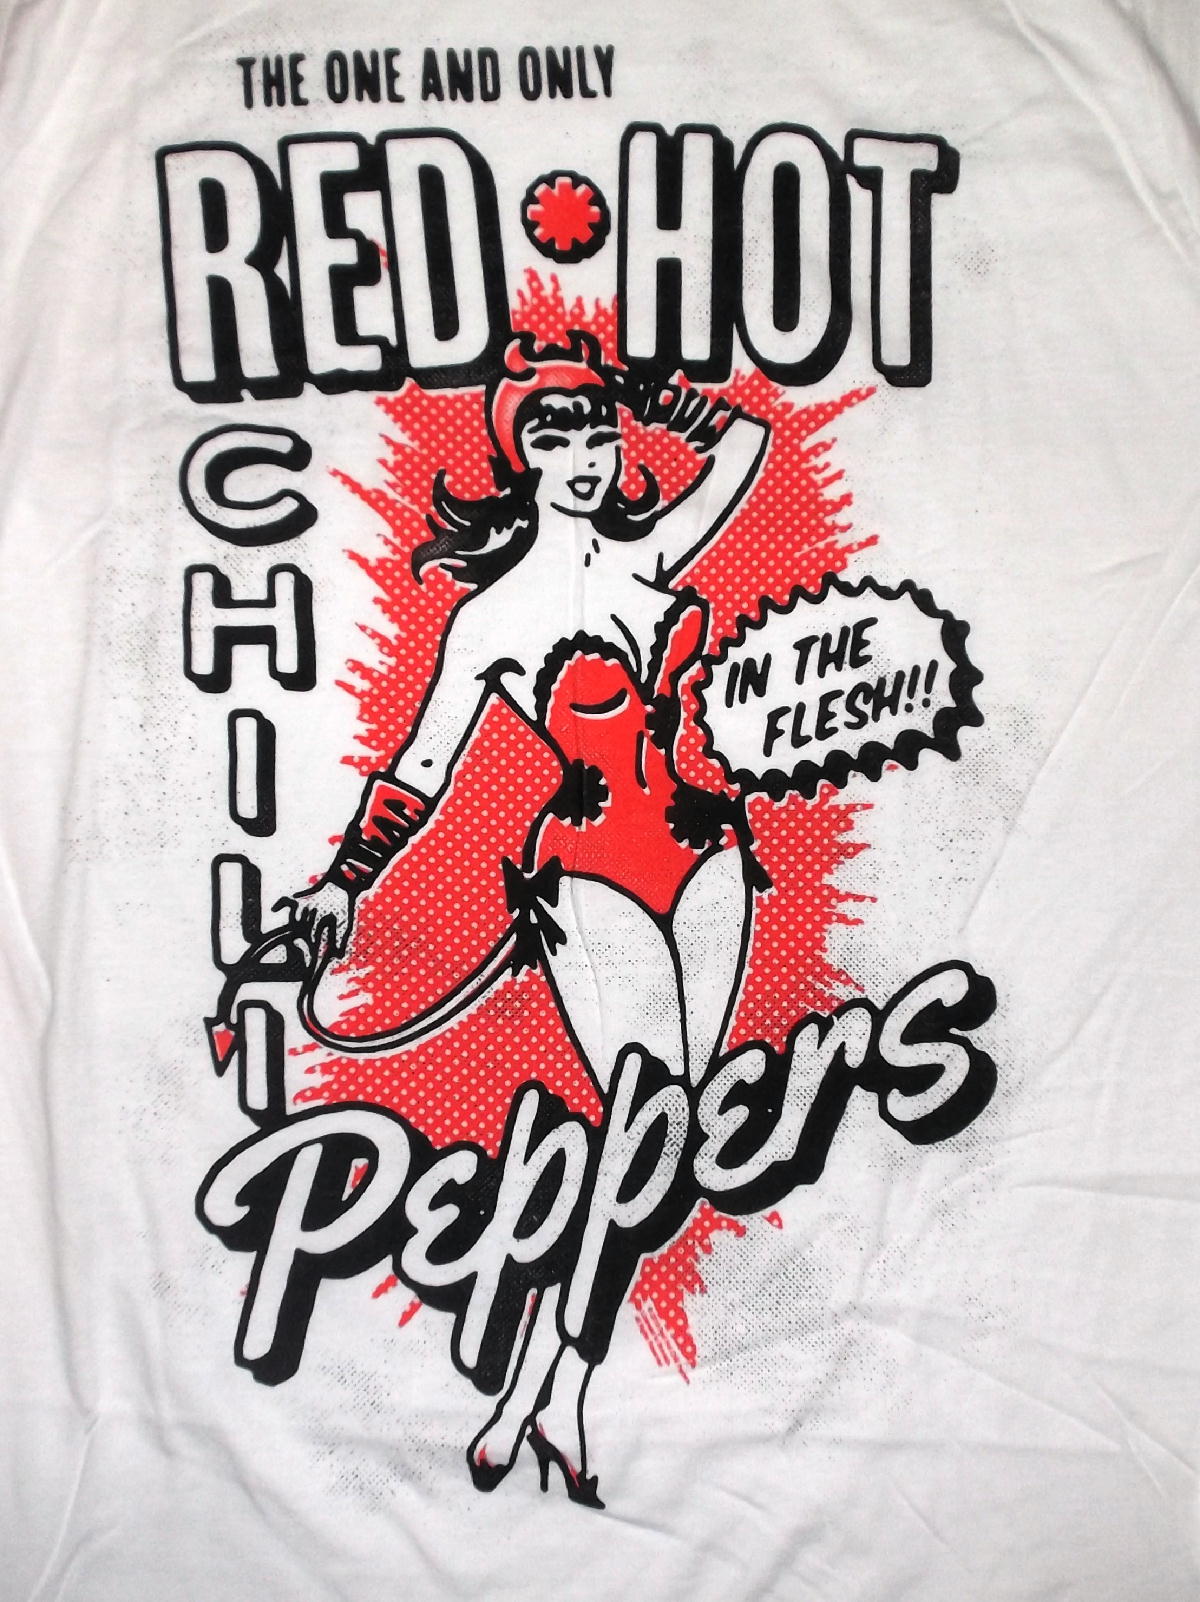 Red Hot Chili Peppers Tシャツ  新品ボディレッドホットチリペッパーズ